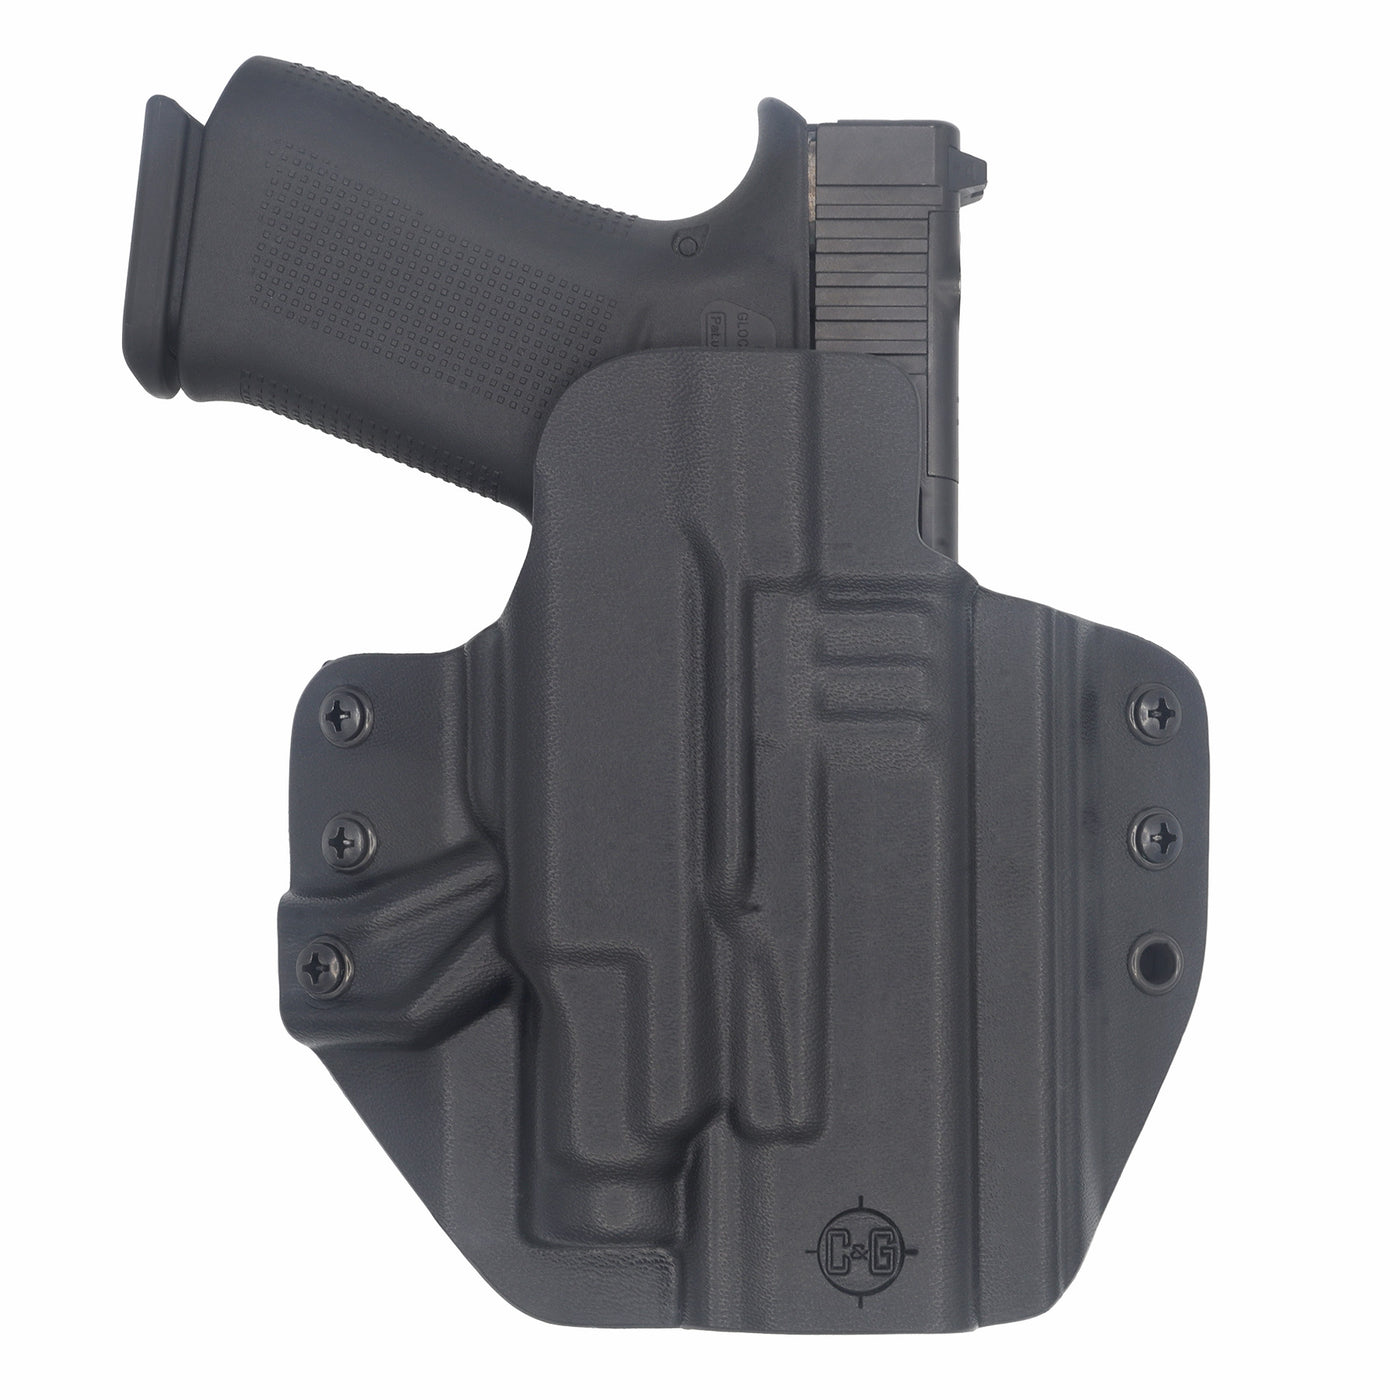 C&G Holsters custom OWB Tactical Glock 43x/48 Streamlight TLR-7 sub in holstered position